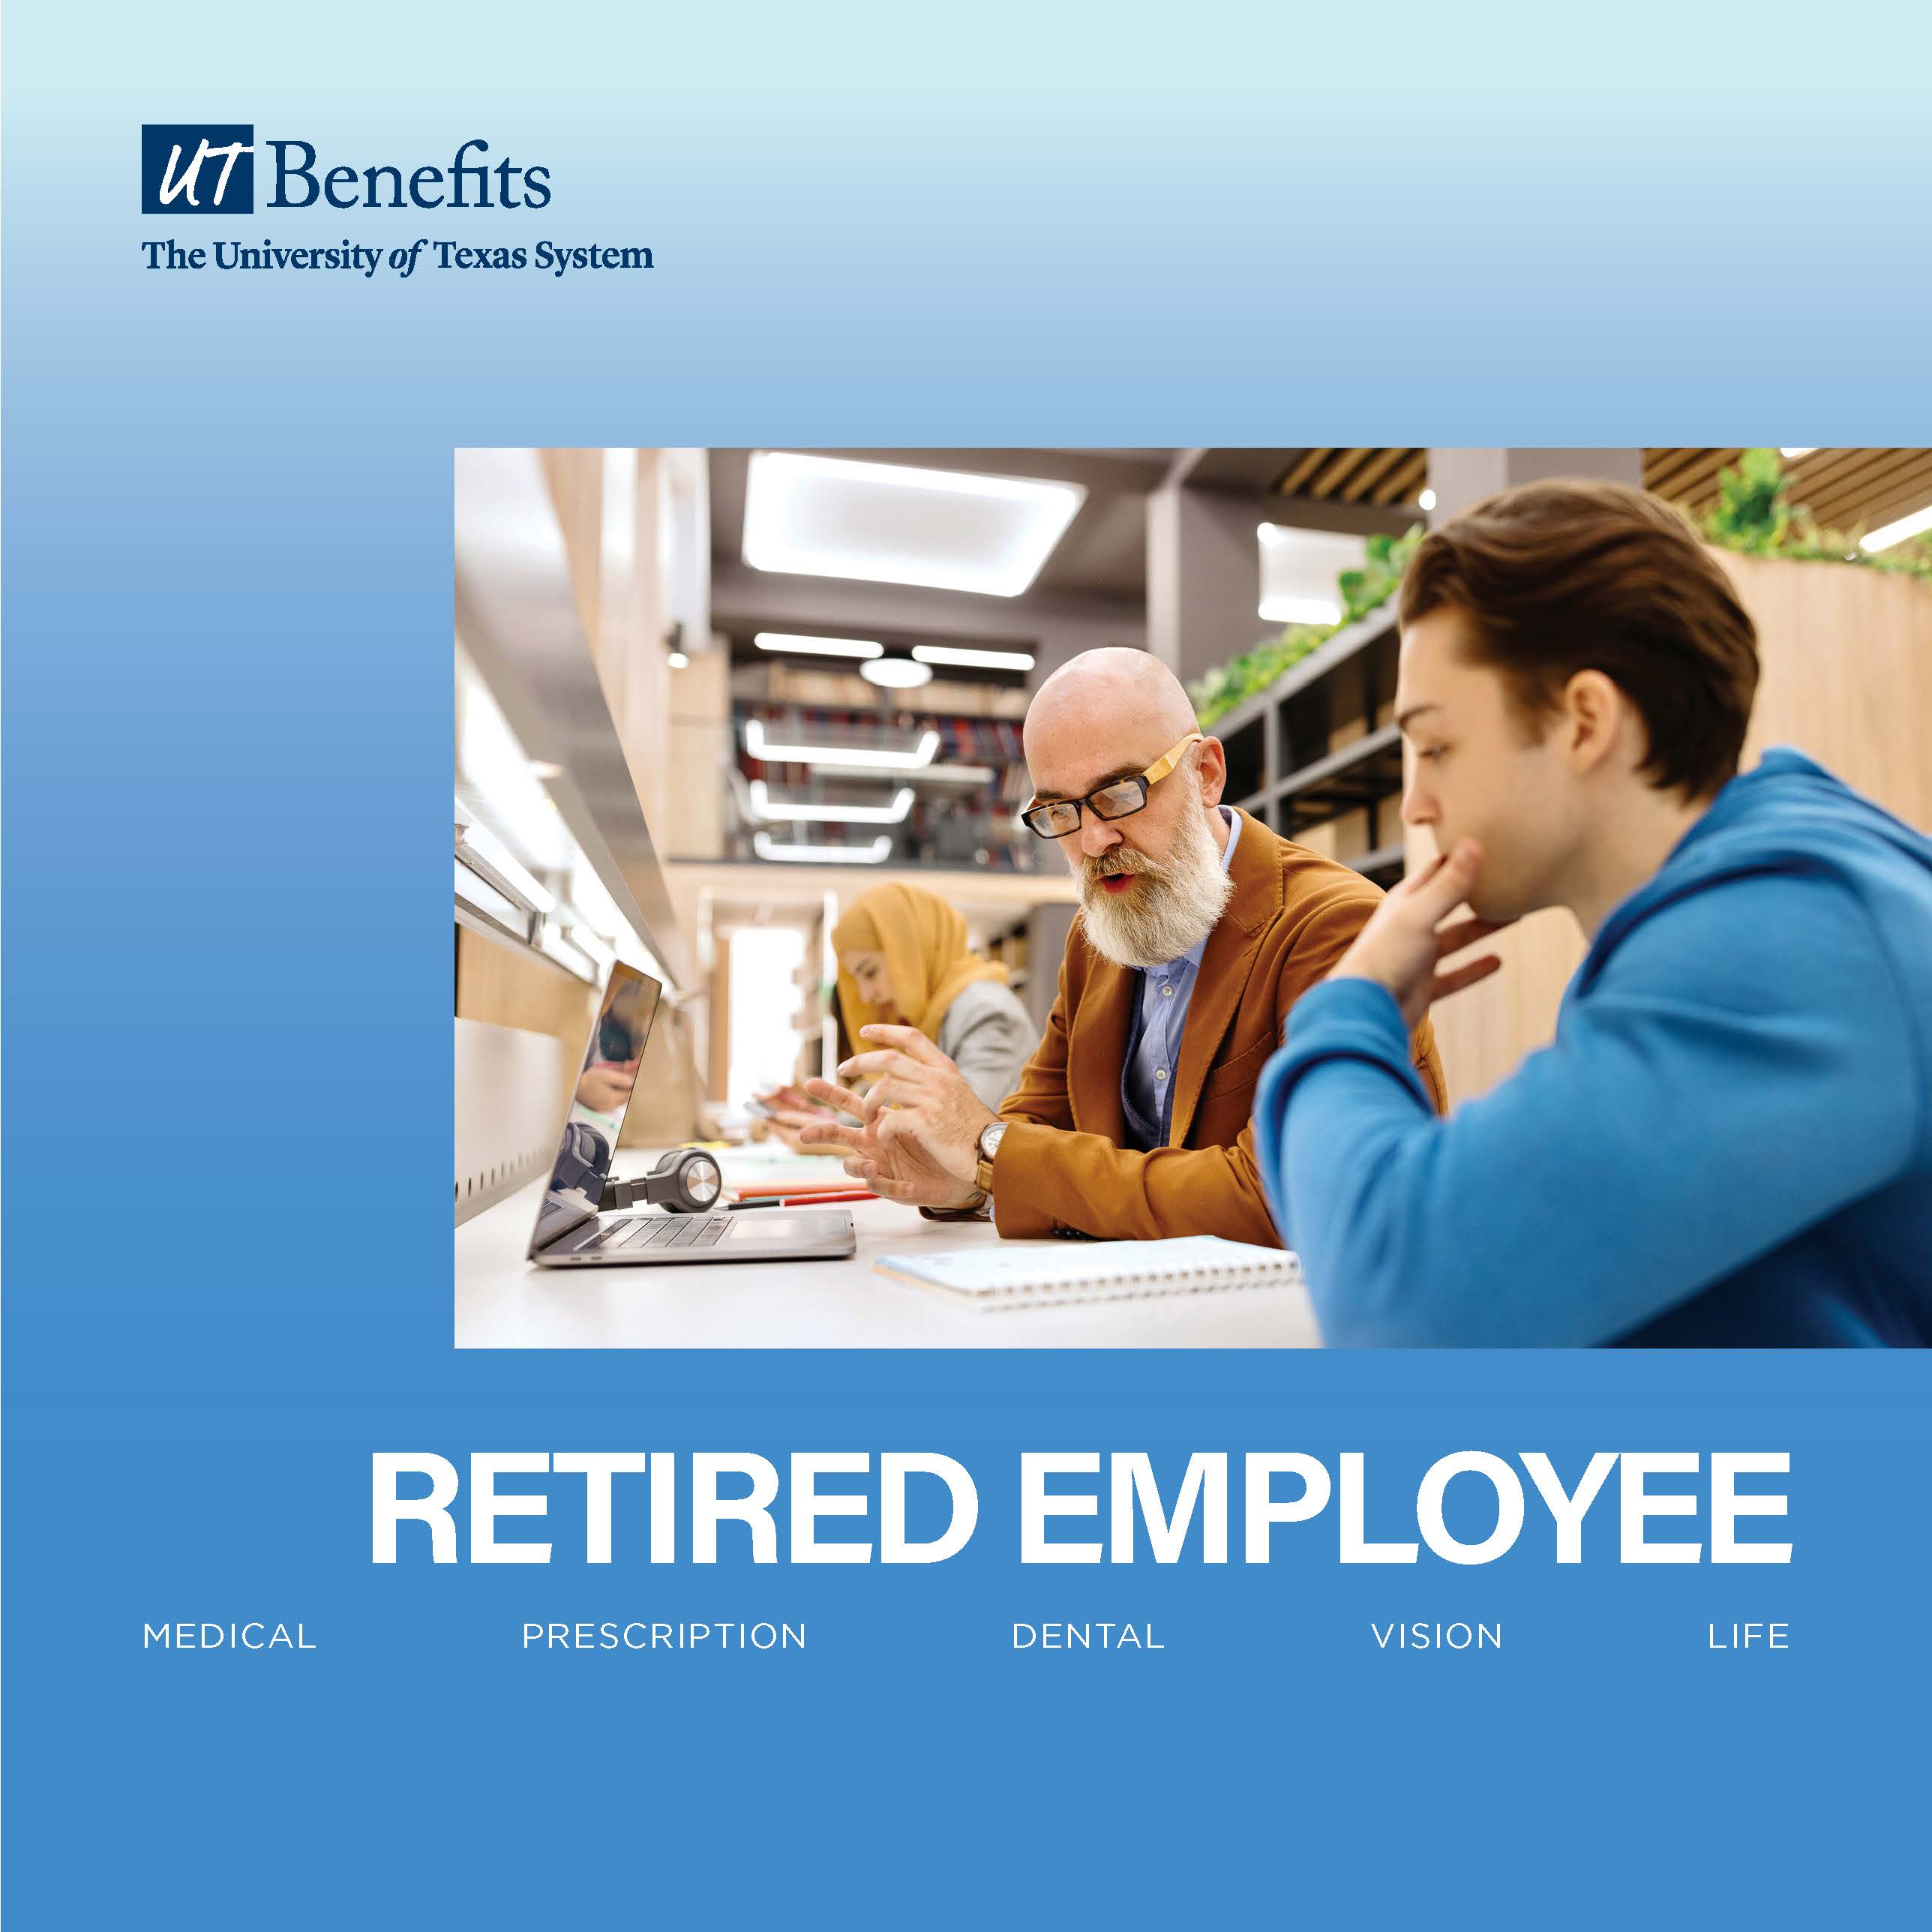 Highlights for Retired Employees cover page